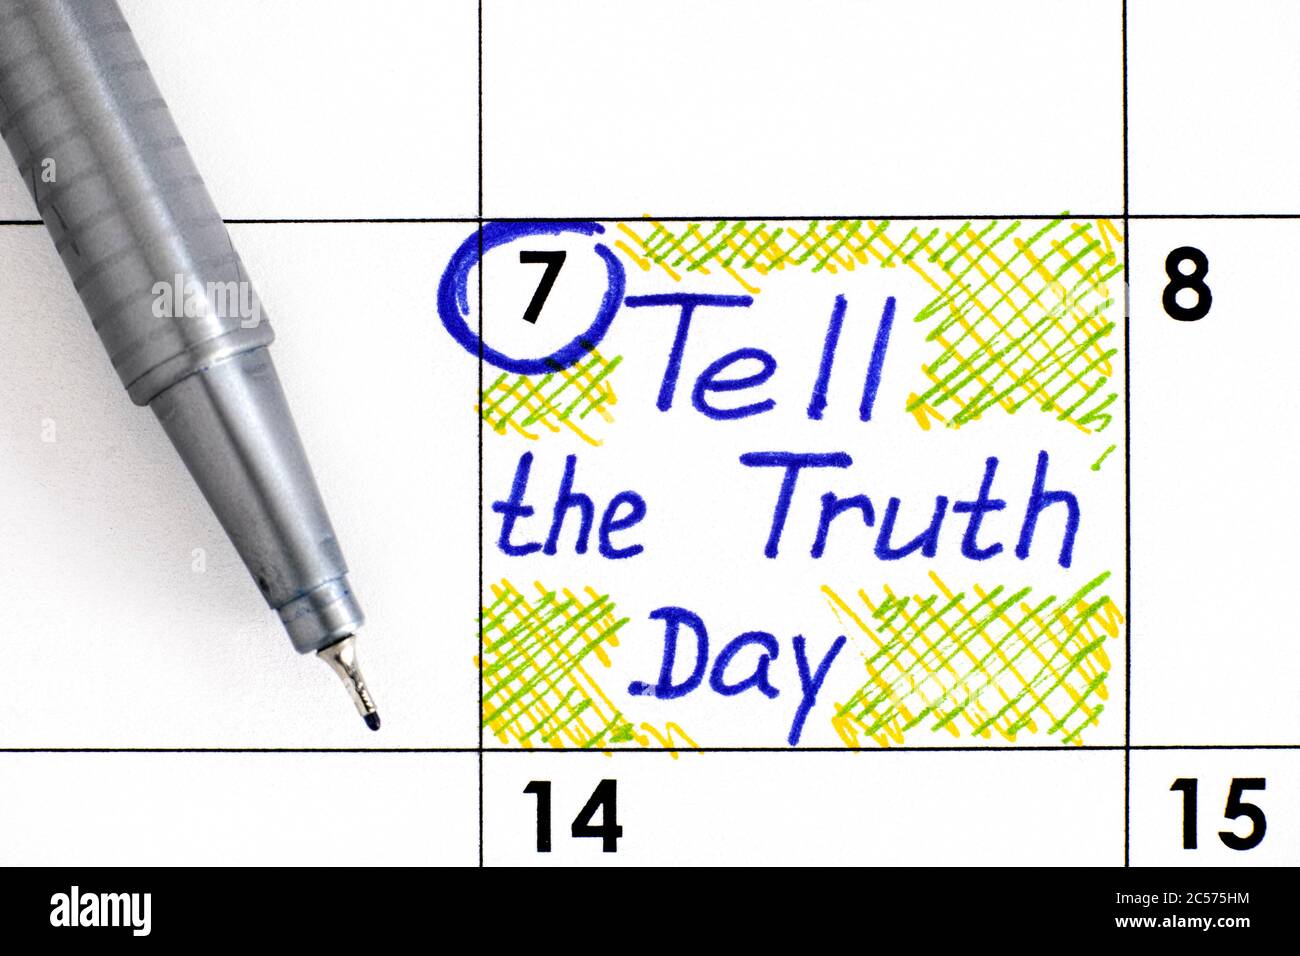 Rappel Tell the Truth Day in Calendar with Pen. Juillet 07. Banque D'Images